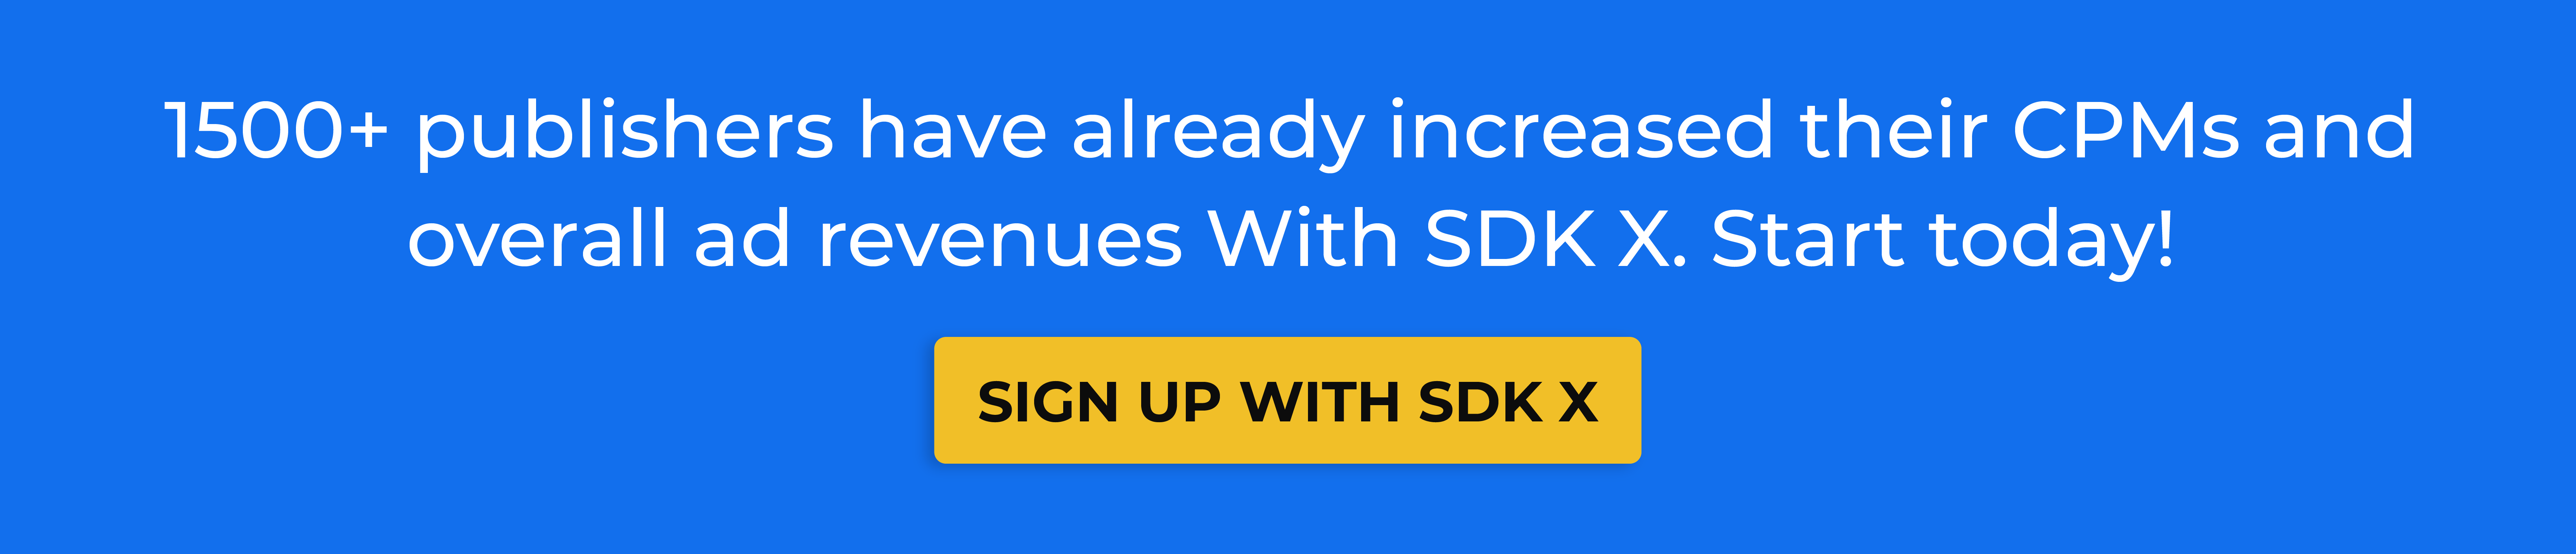 Sign up with SDK X